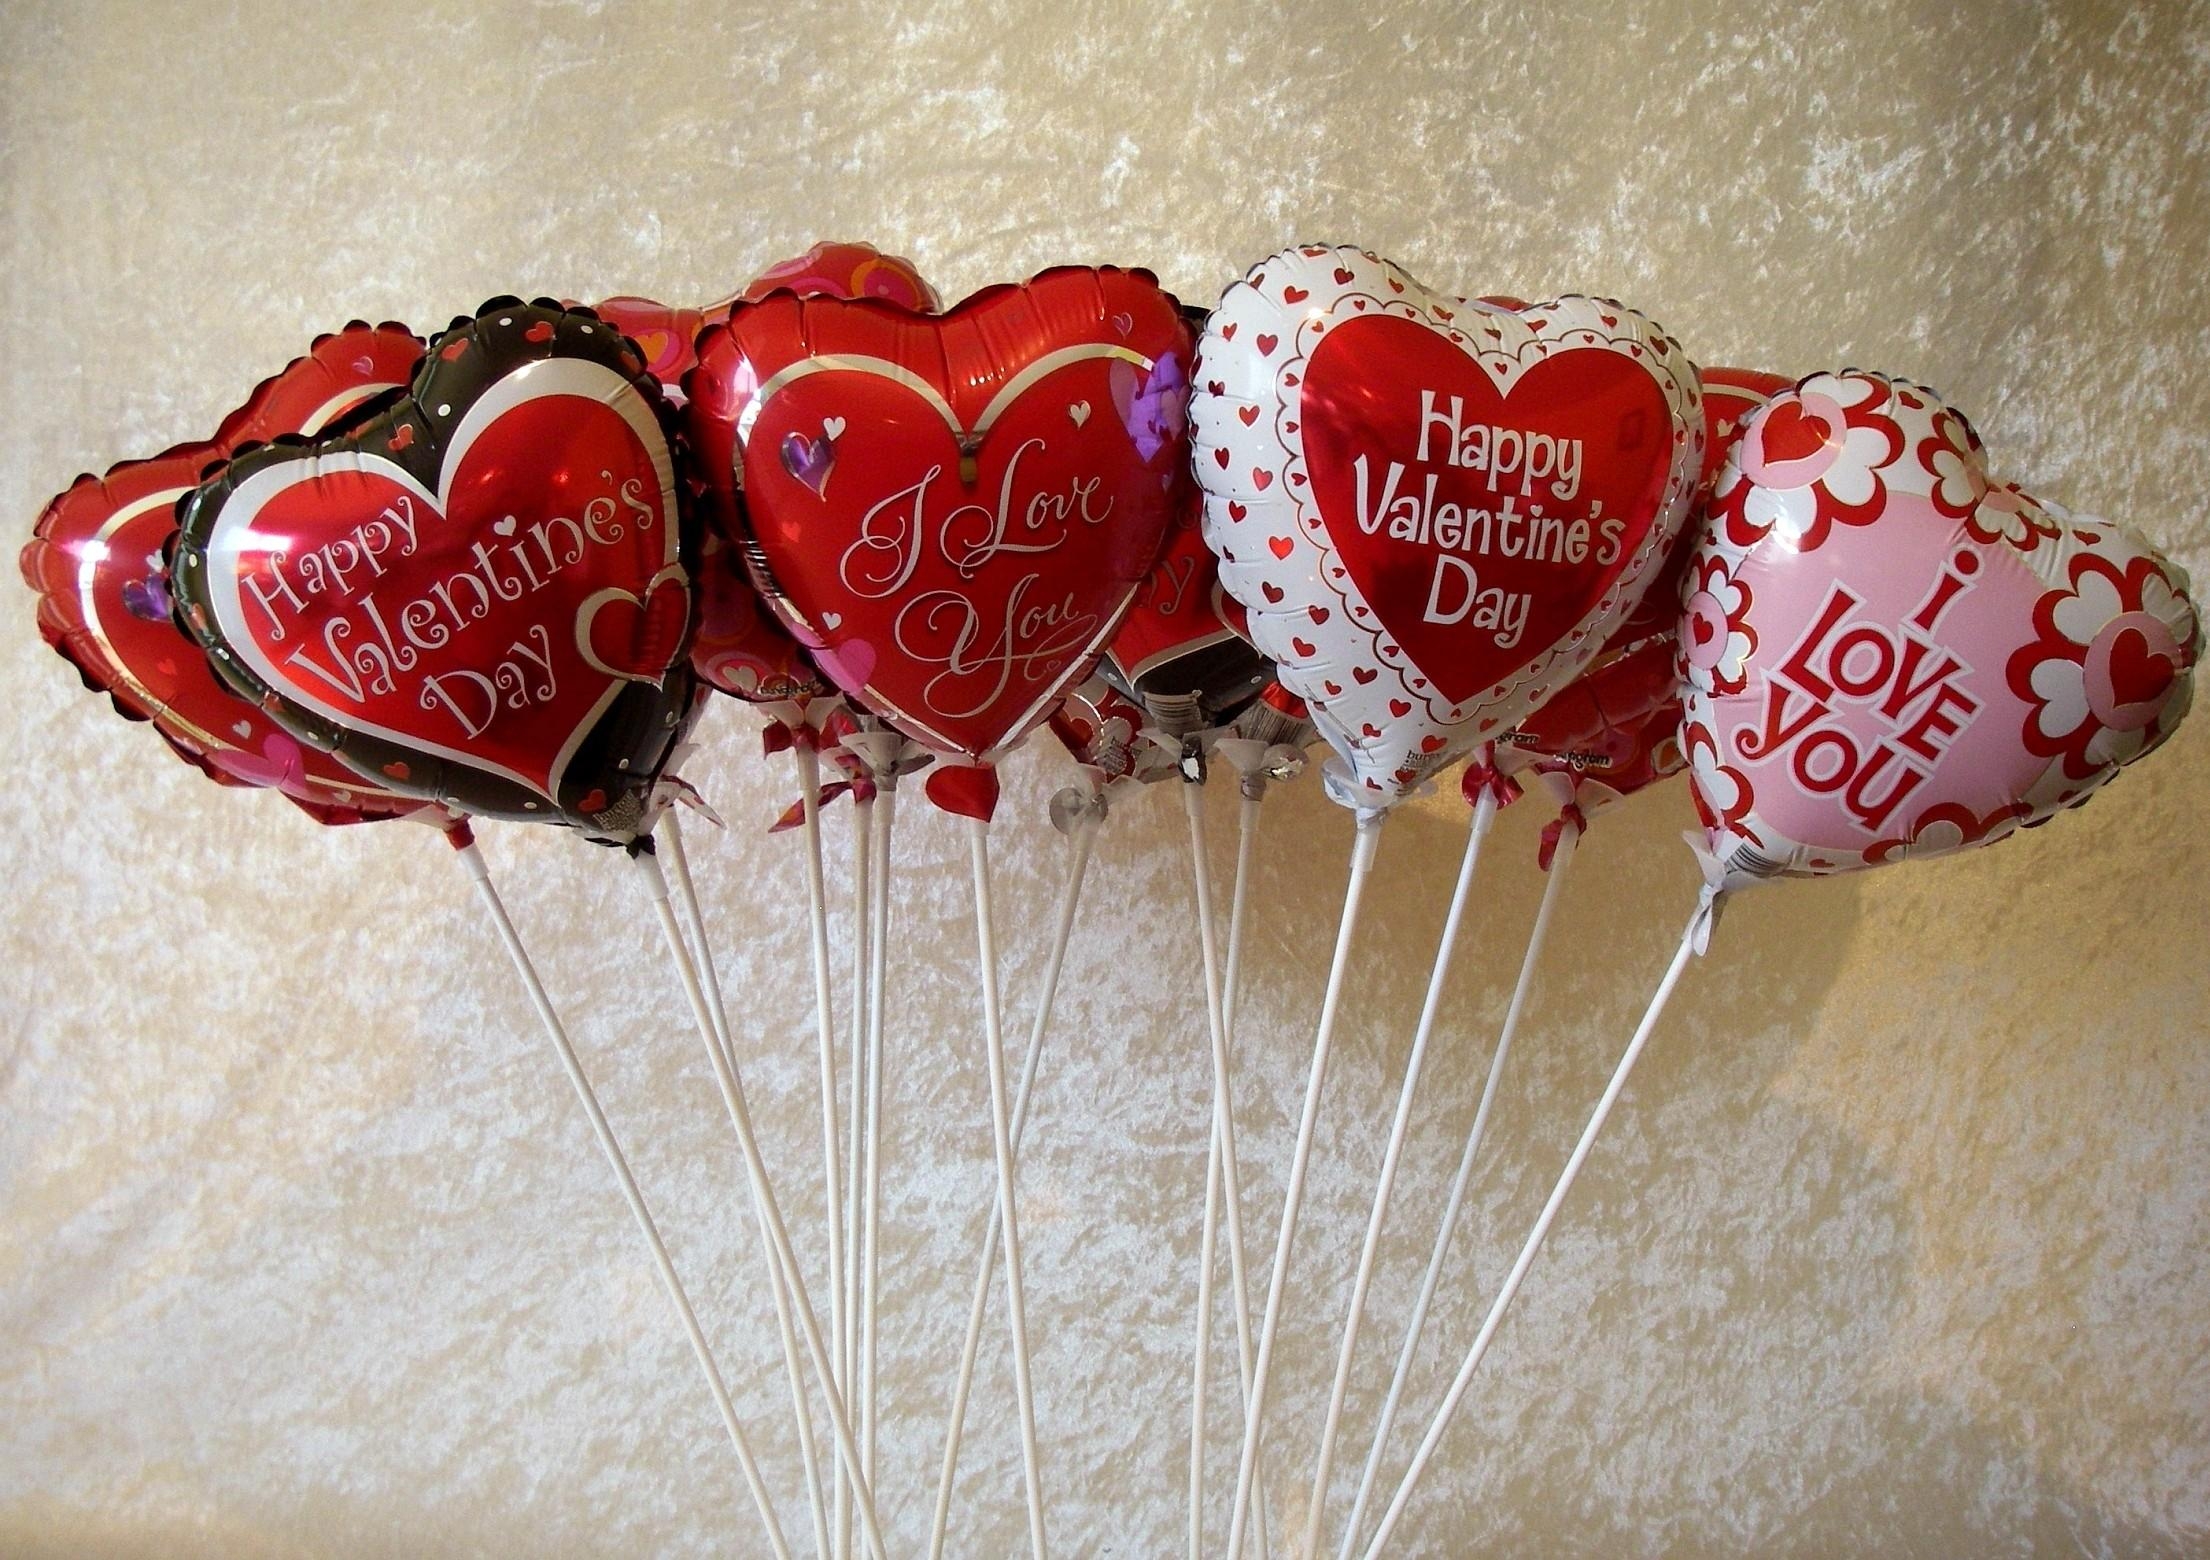 hearts, holidays, balloons, lot, lettering, inscriptions, taw, valentine's day